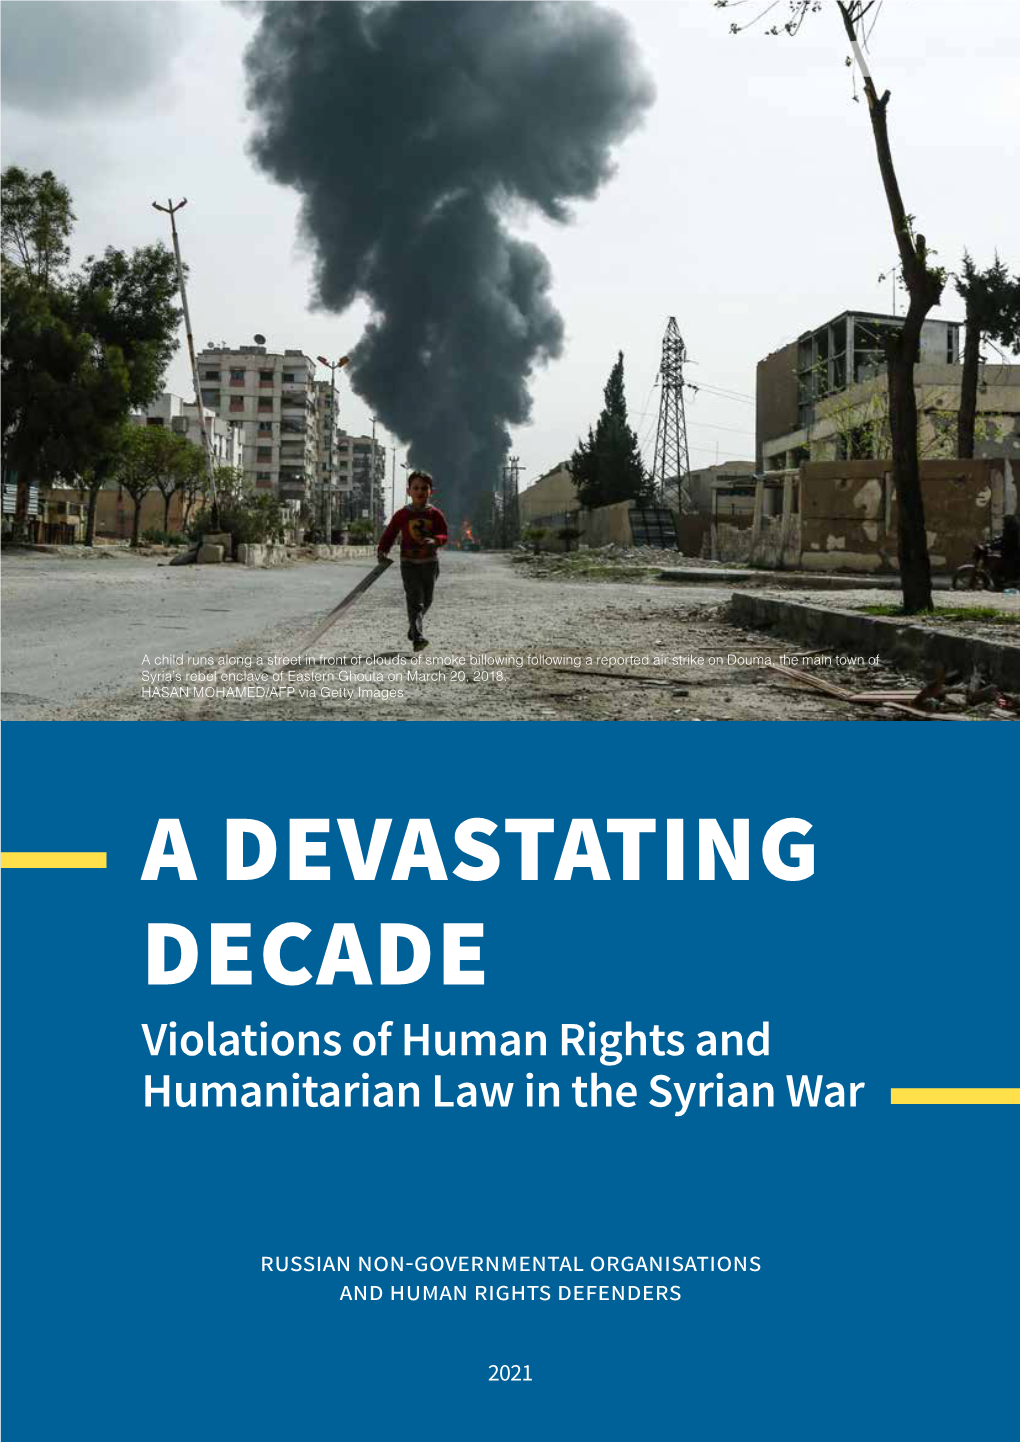 A DEVASTATING DECADE Violations of Human Rights and Humanitarian Law in the Syrian War